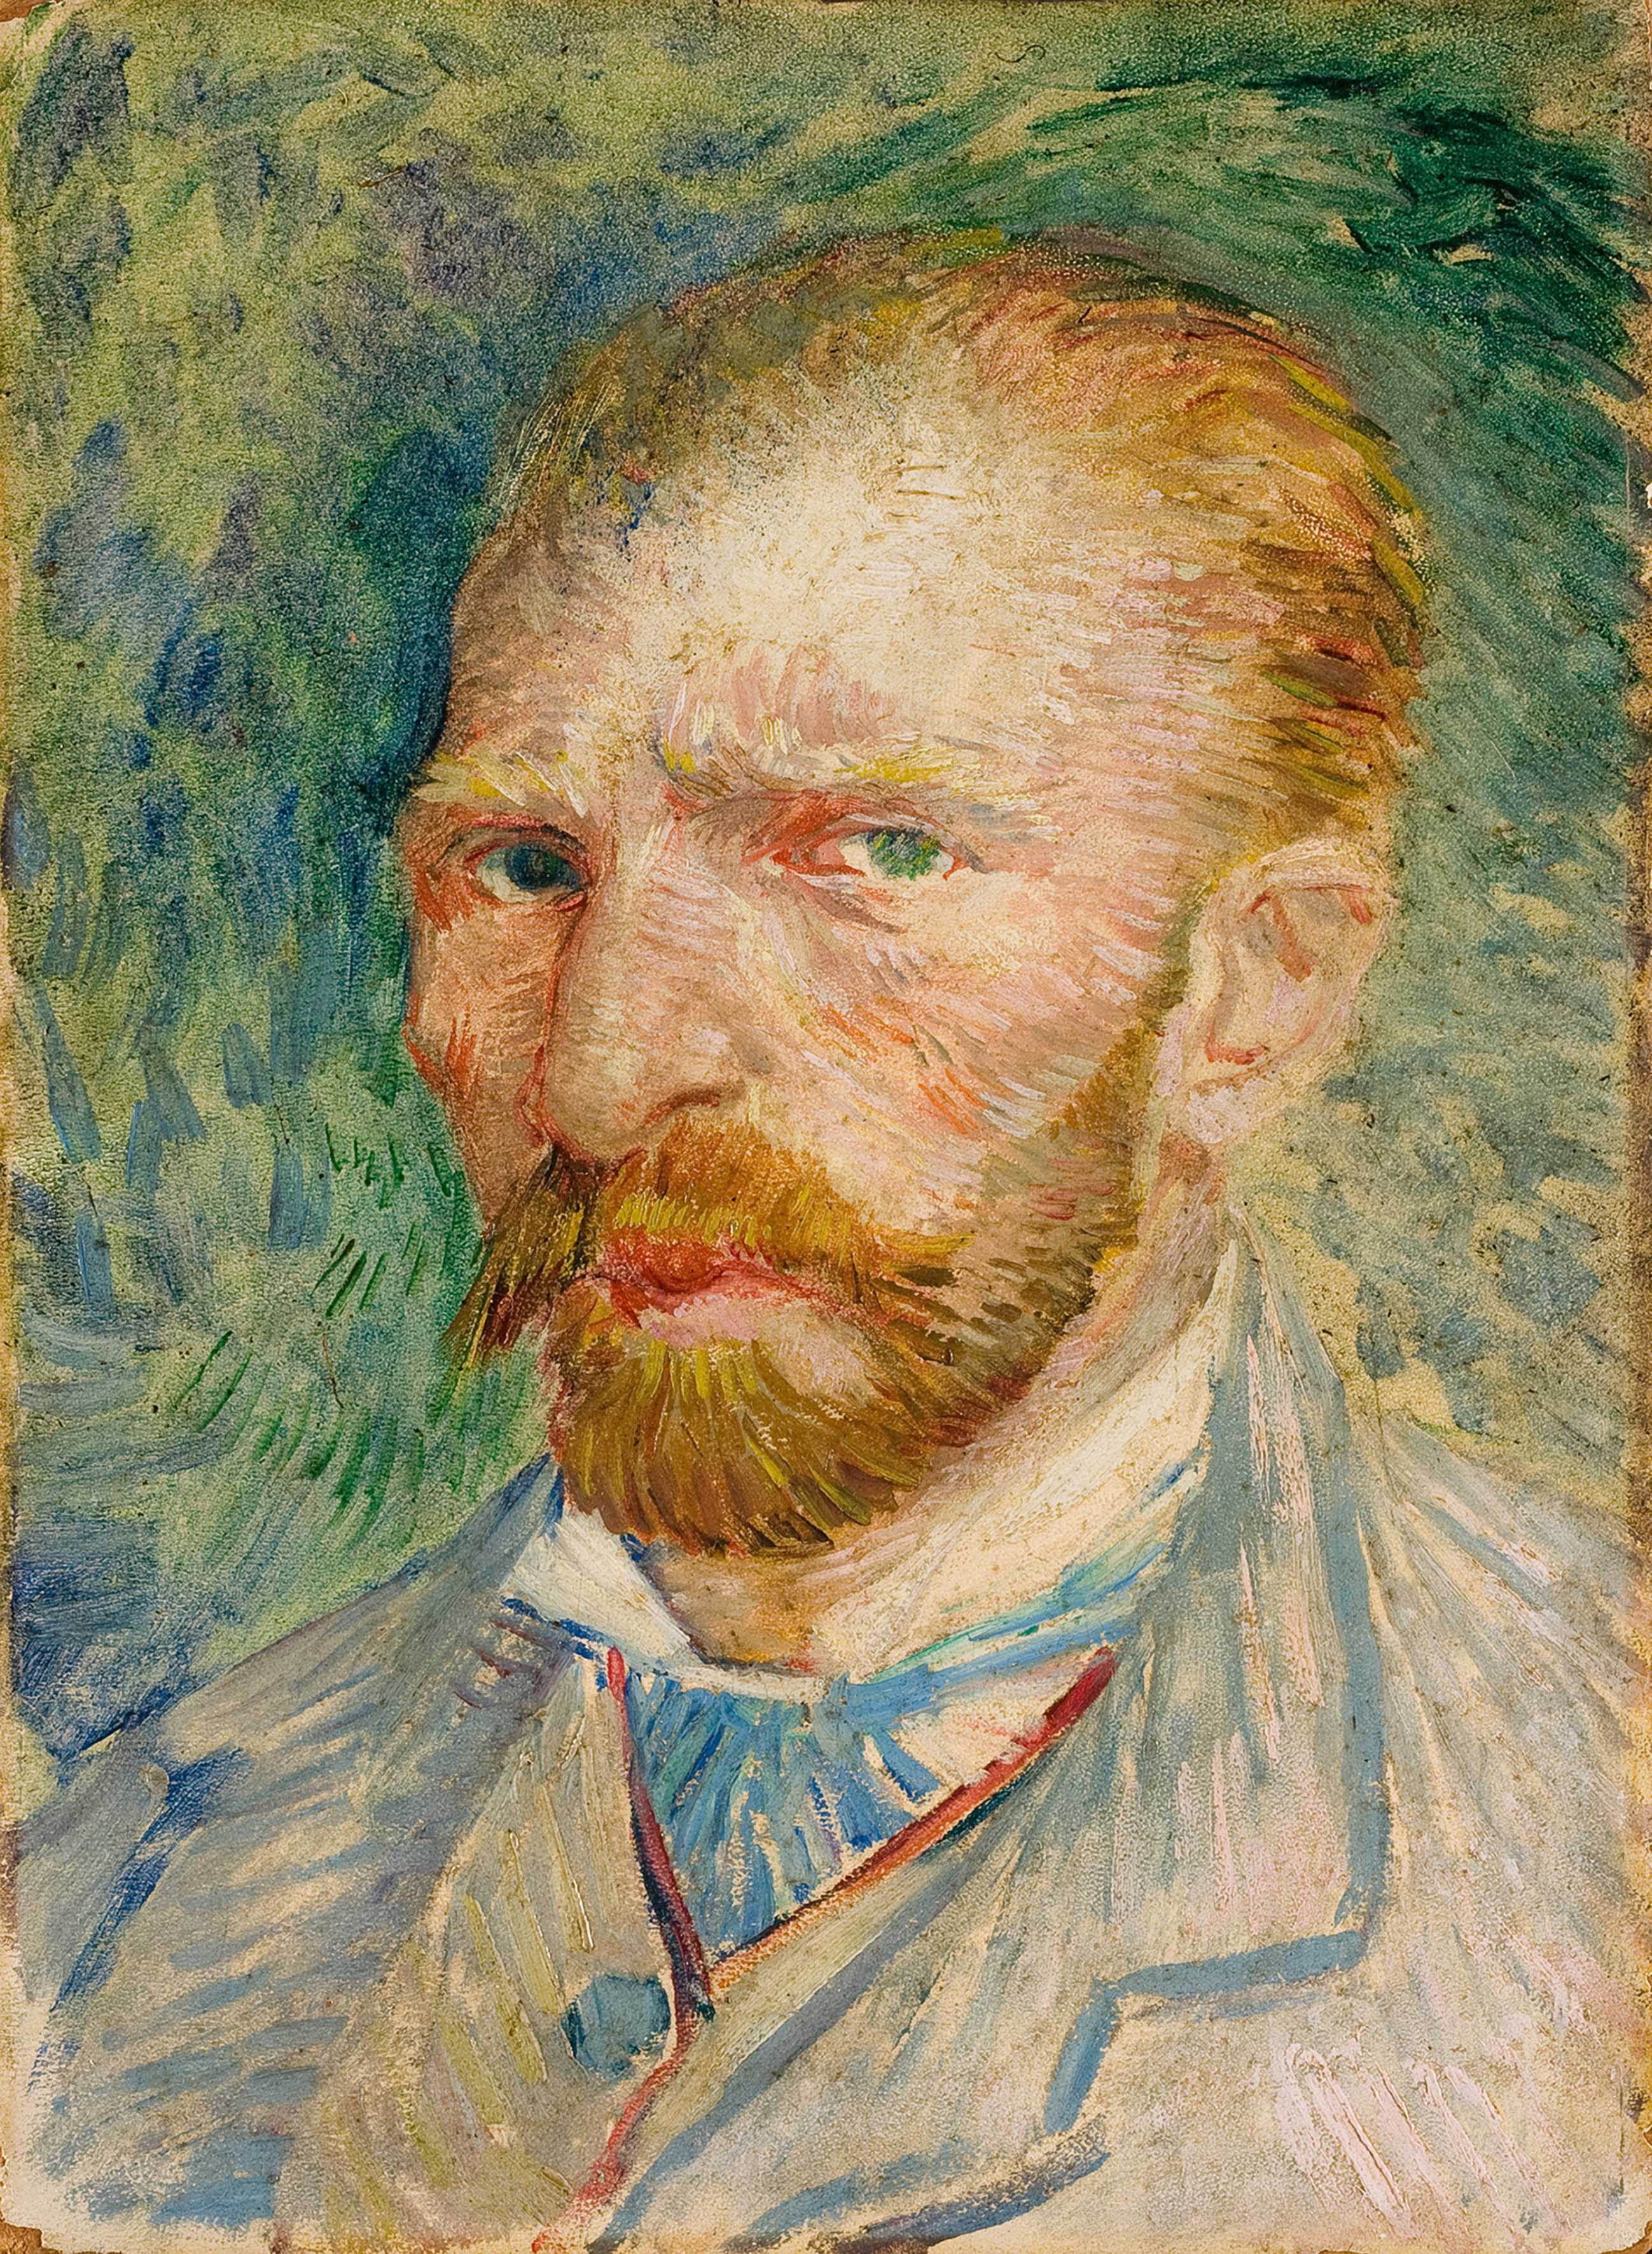 Van Gogh: Masterpieces from the Kröller-Müller Museum, Palazzo Bonaparte, Rome: Until 7 May 2023